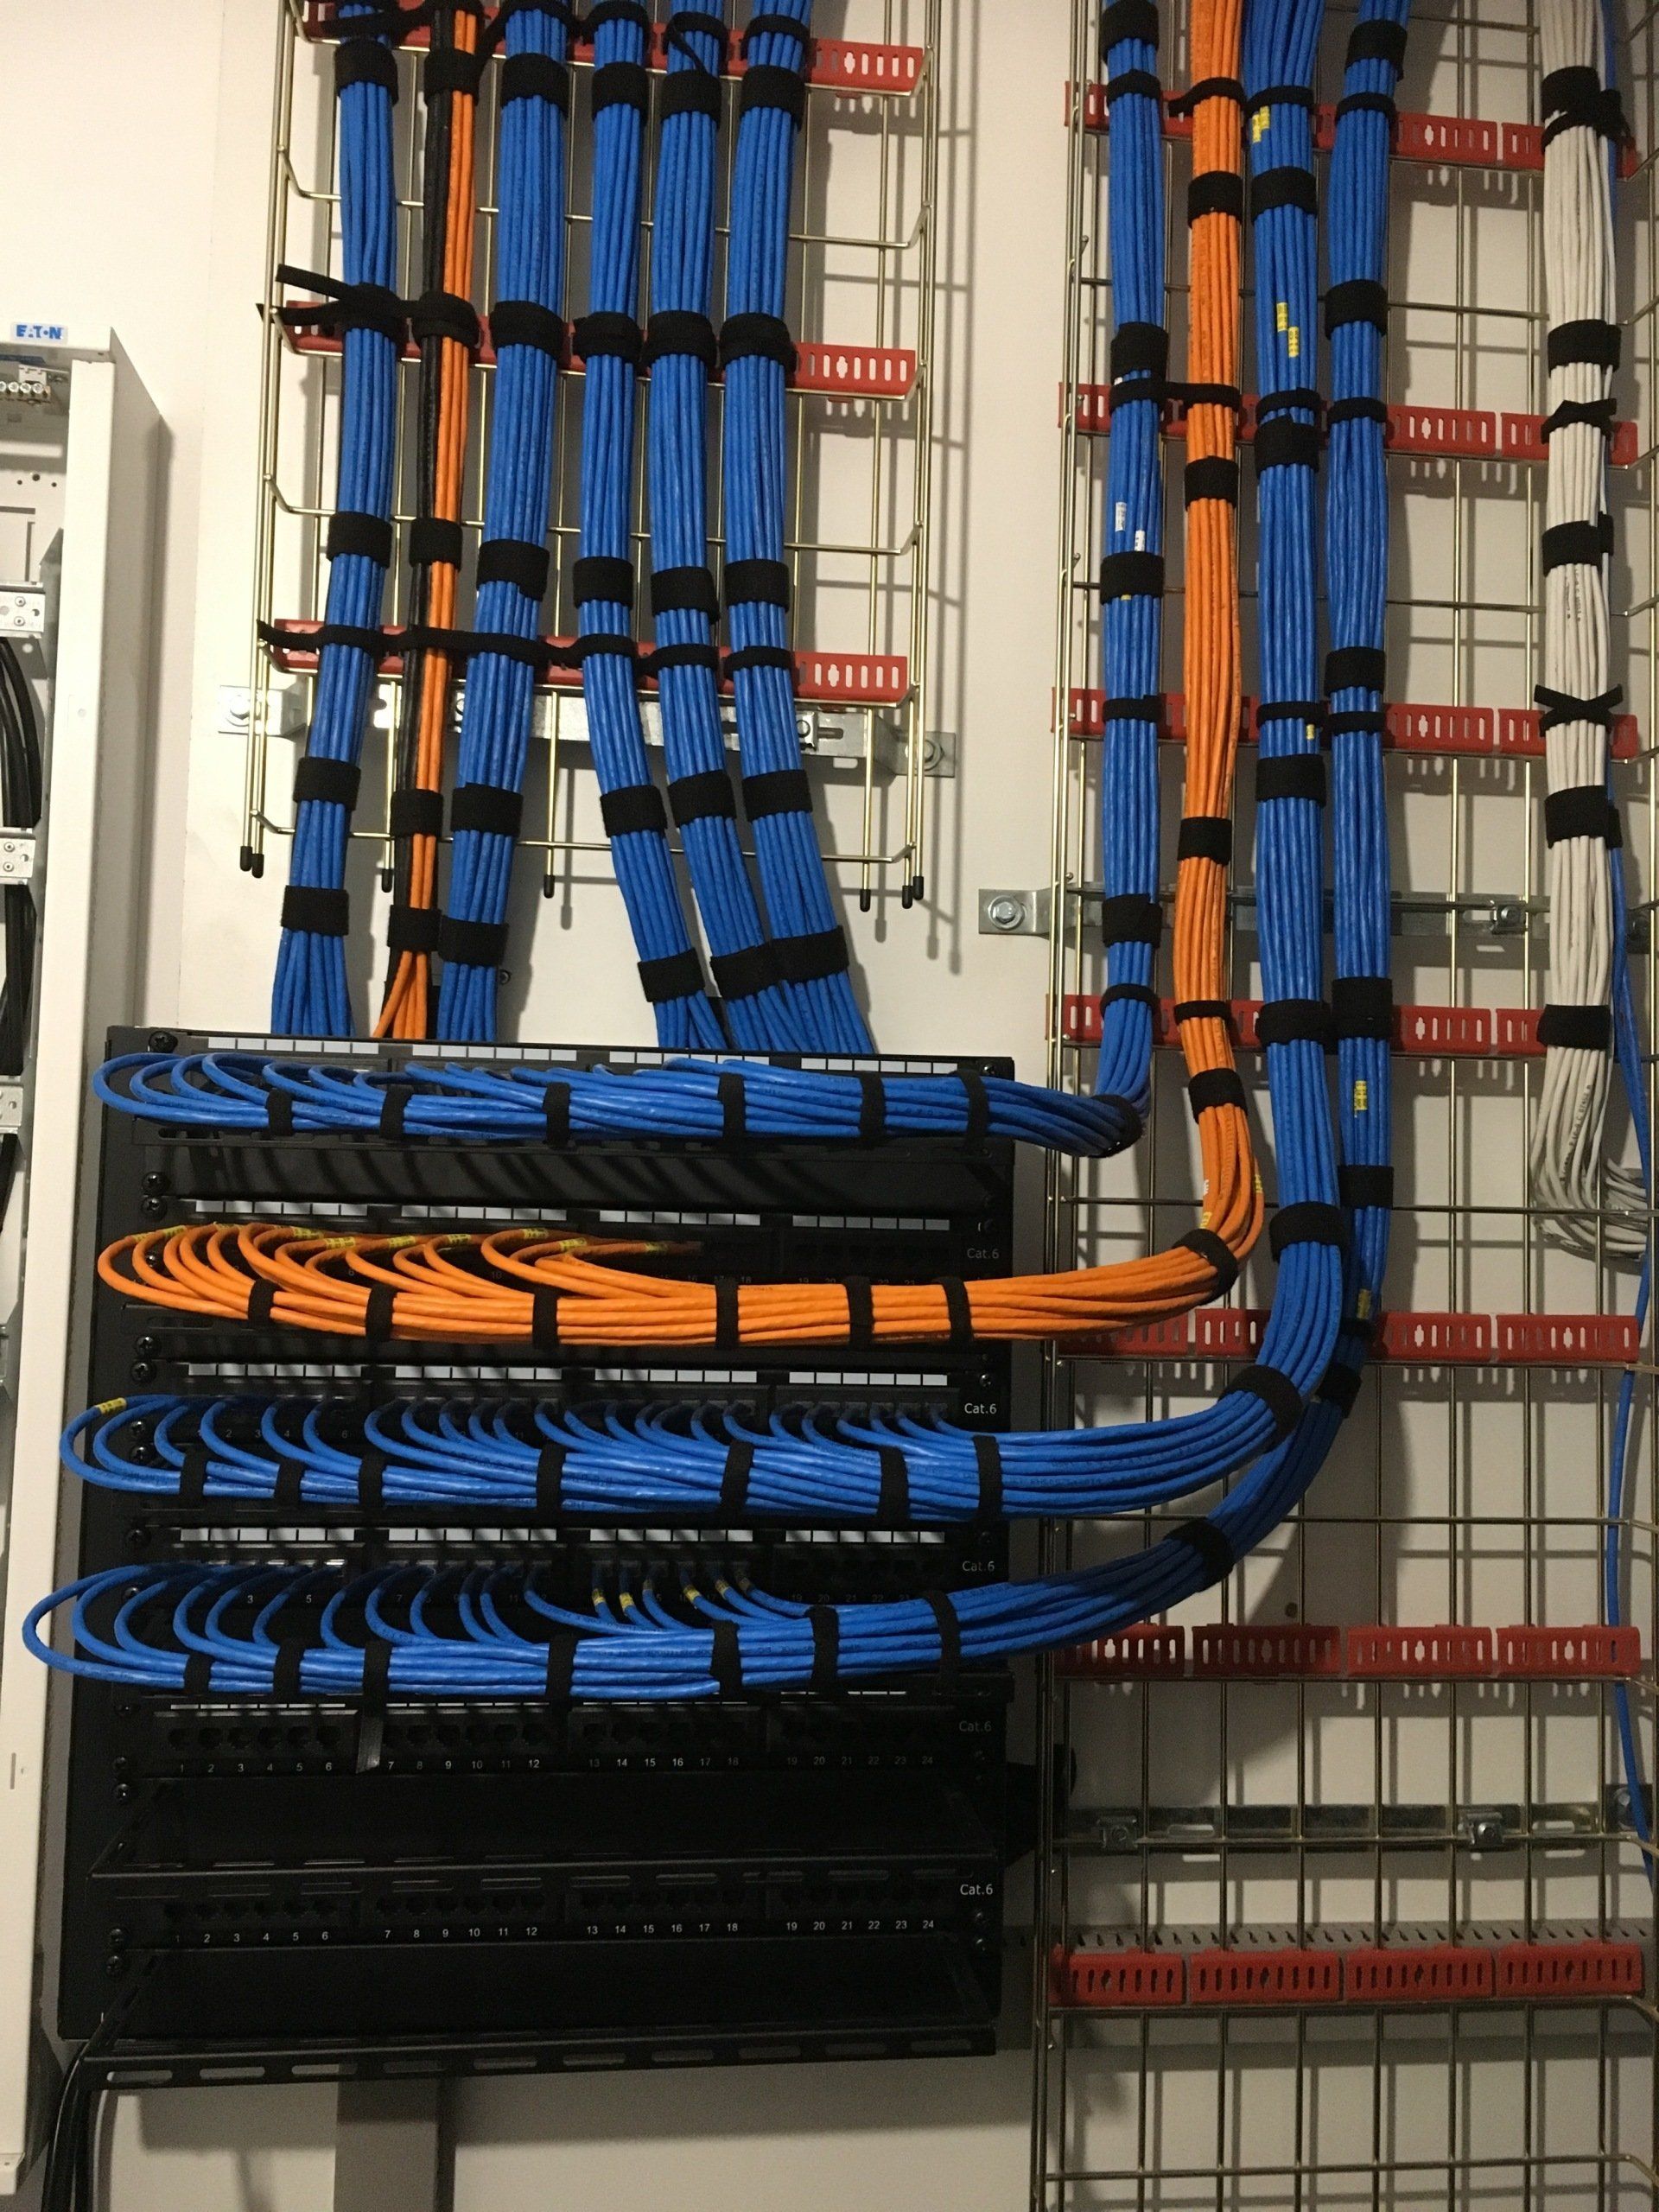 Photograph of patch cables connected to patch panel